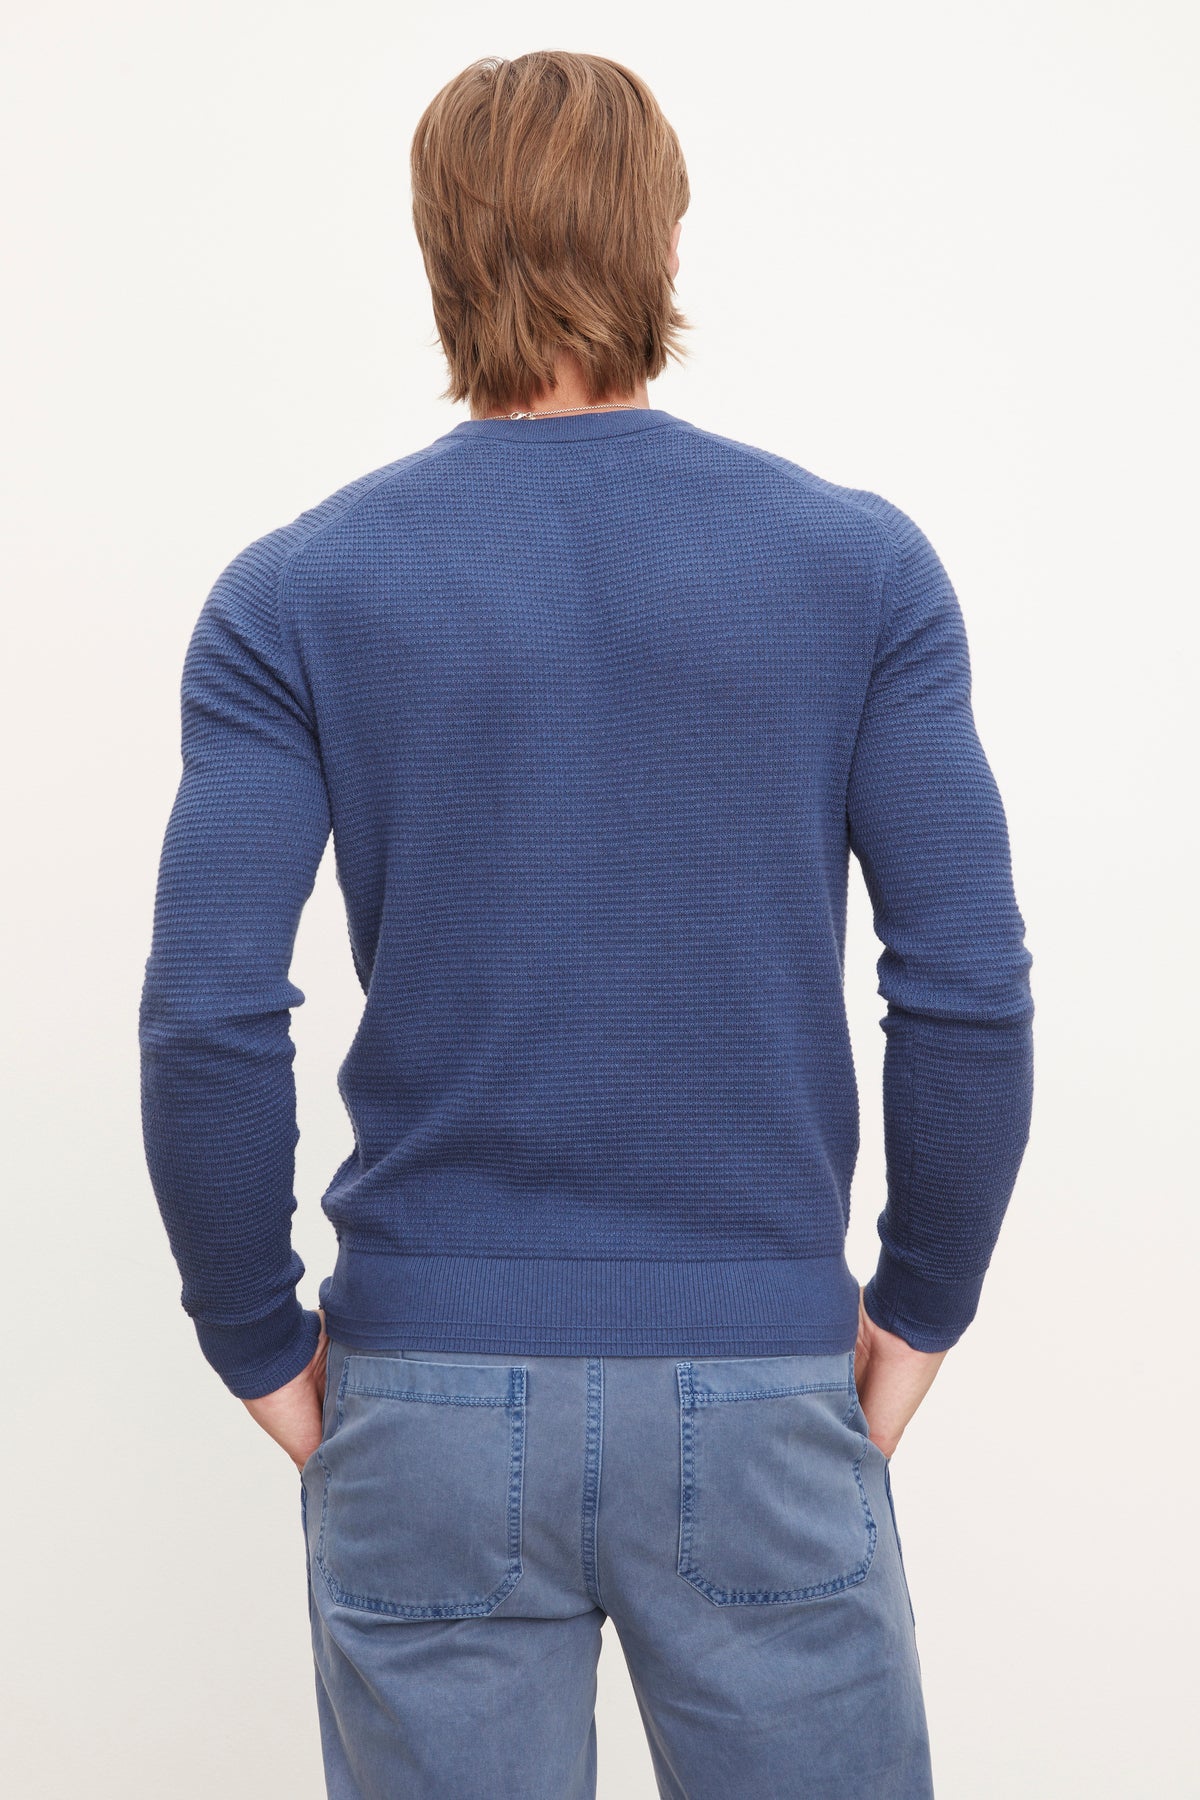 A man in a blue Velvet by Graham & Spencer JAKE THERMAL HENLEY sweater.-36009995239617